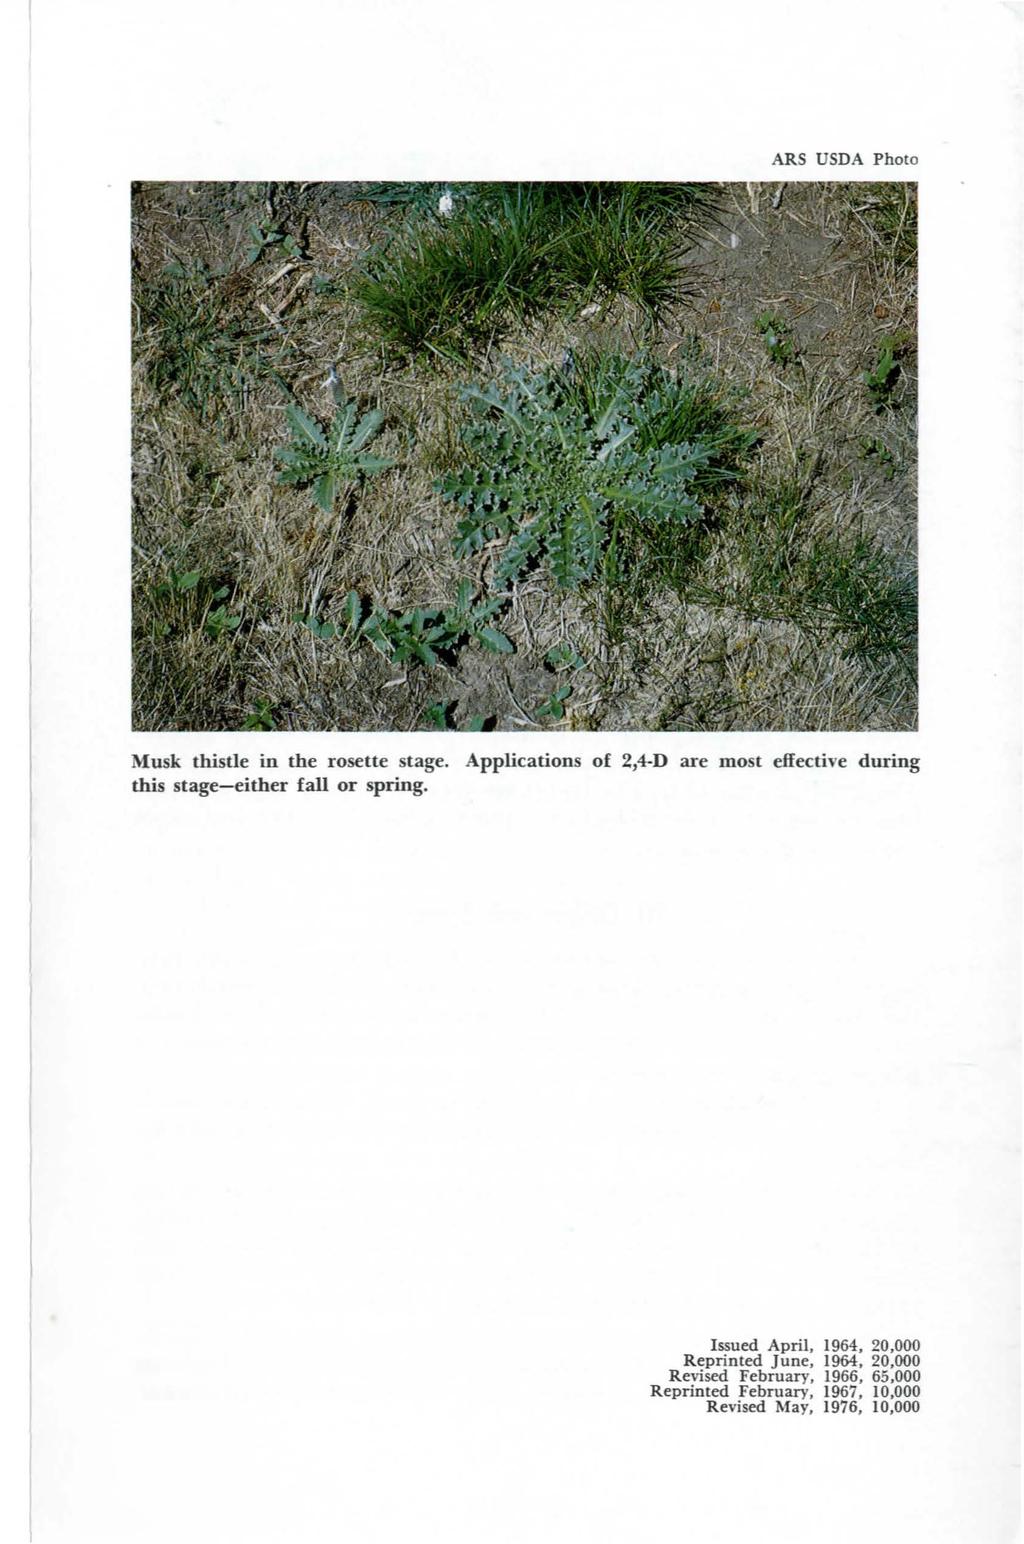 ARS USDA Photo Musk thistle in the rosette stage. Applications of 2,4-D are most effective during this stage-either fall or spring.